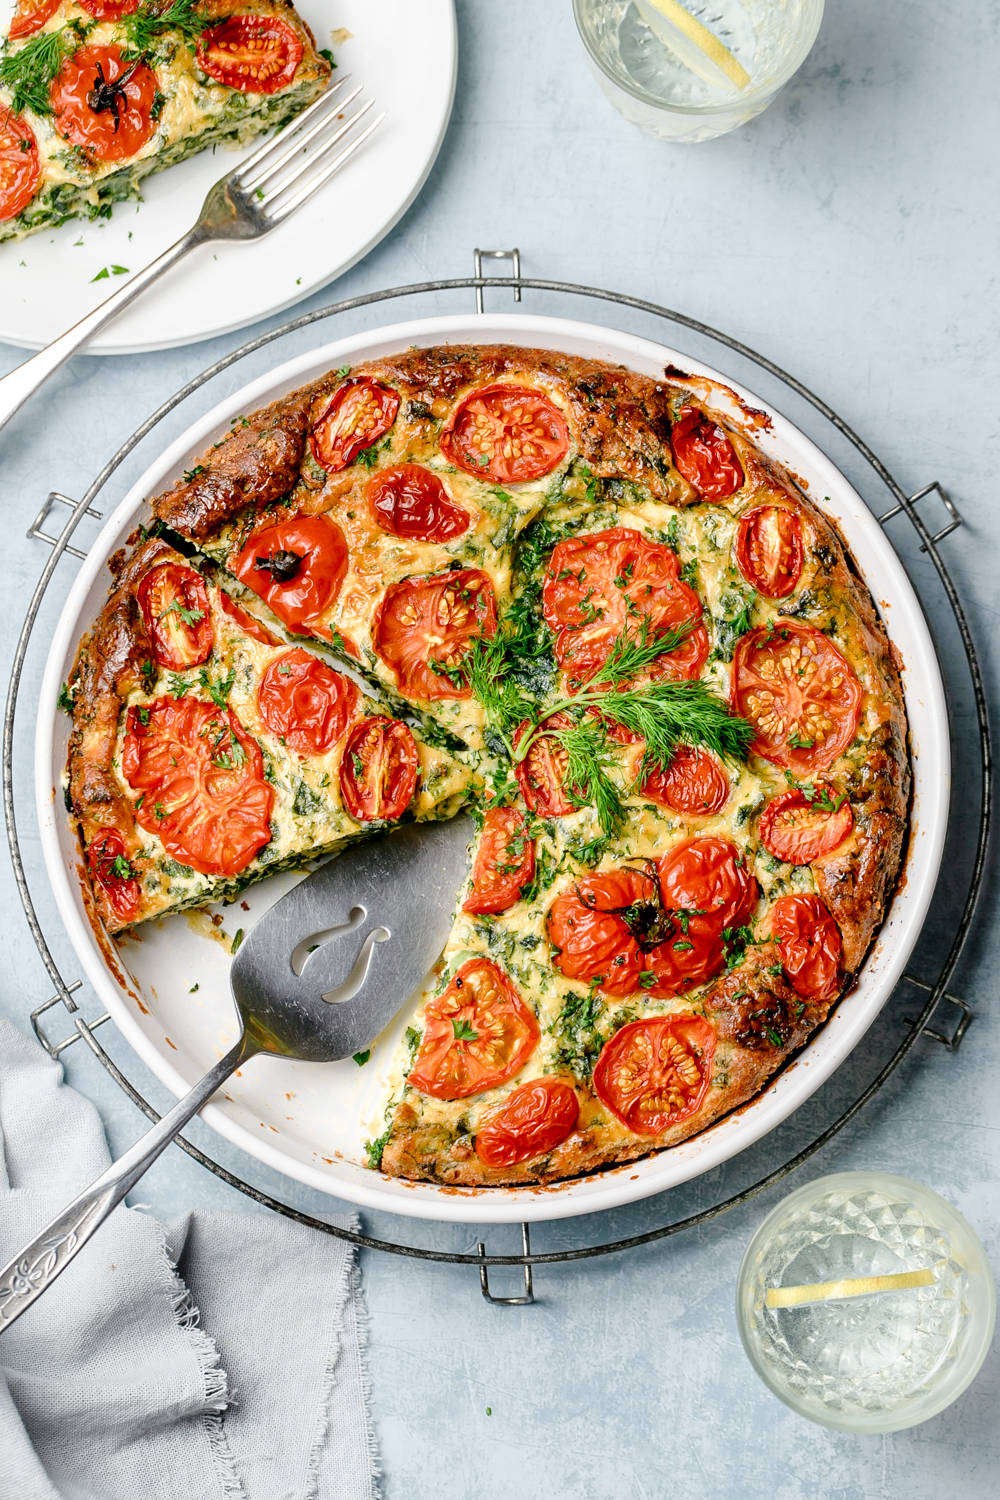 Crustless ricotta pie in a round white baking dish, made with kale and with sliced tomatoes on top. Silver serving utensil in dish.